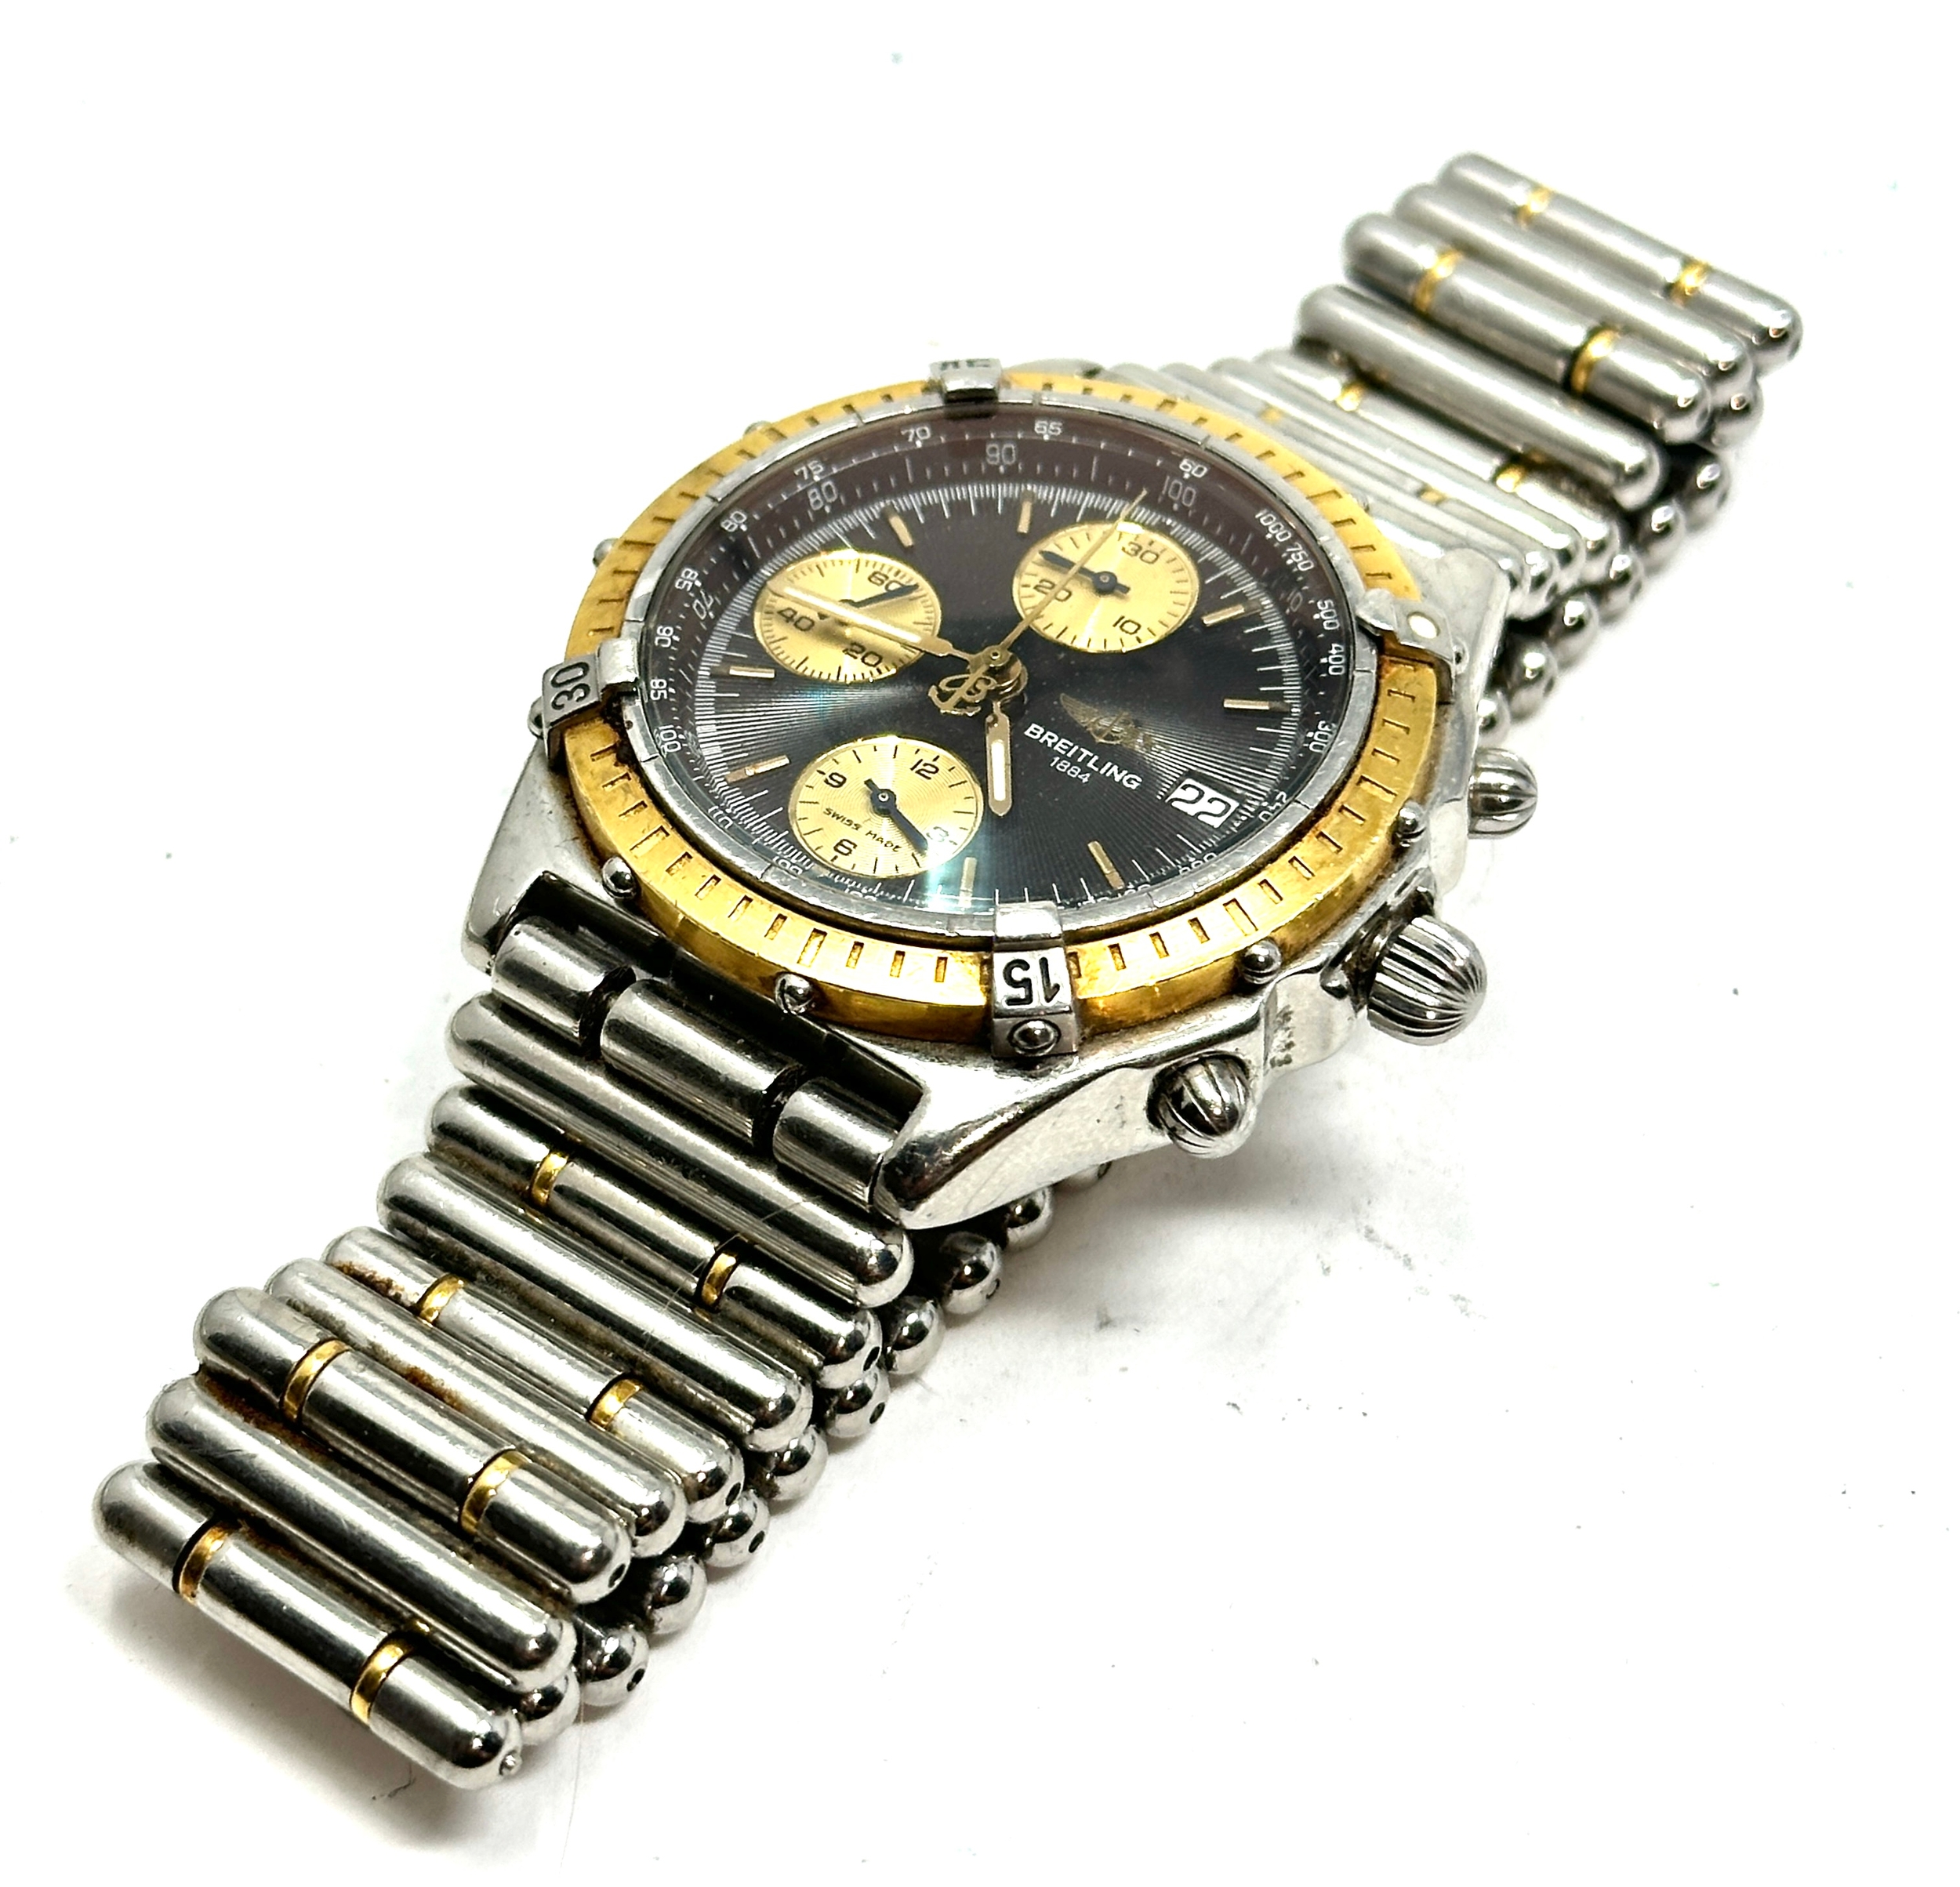 BREITLING 1884 chronograph steel / gold automatic gents wristwatch D130487the watch is ticking - Image 4 of 7